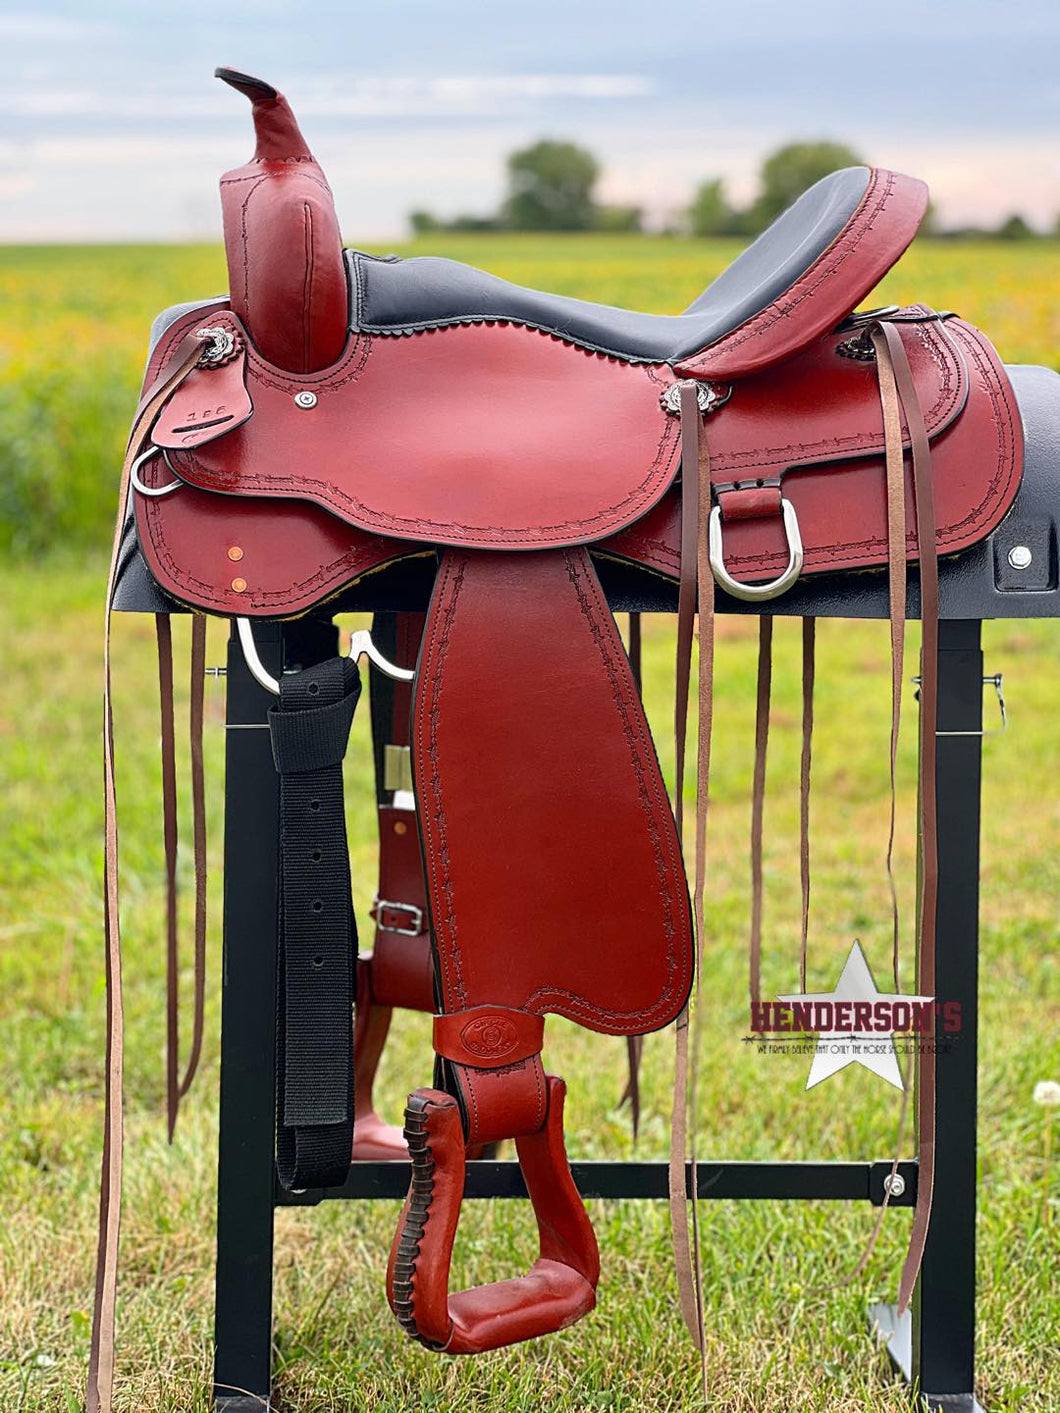 Circle S Trail Saddle - Henderson's Western Store